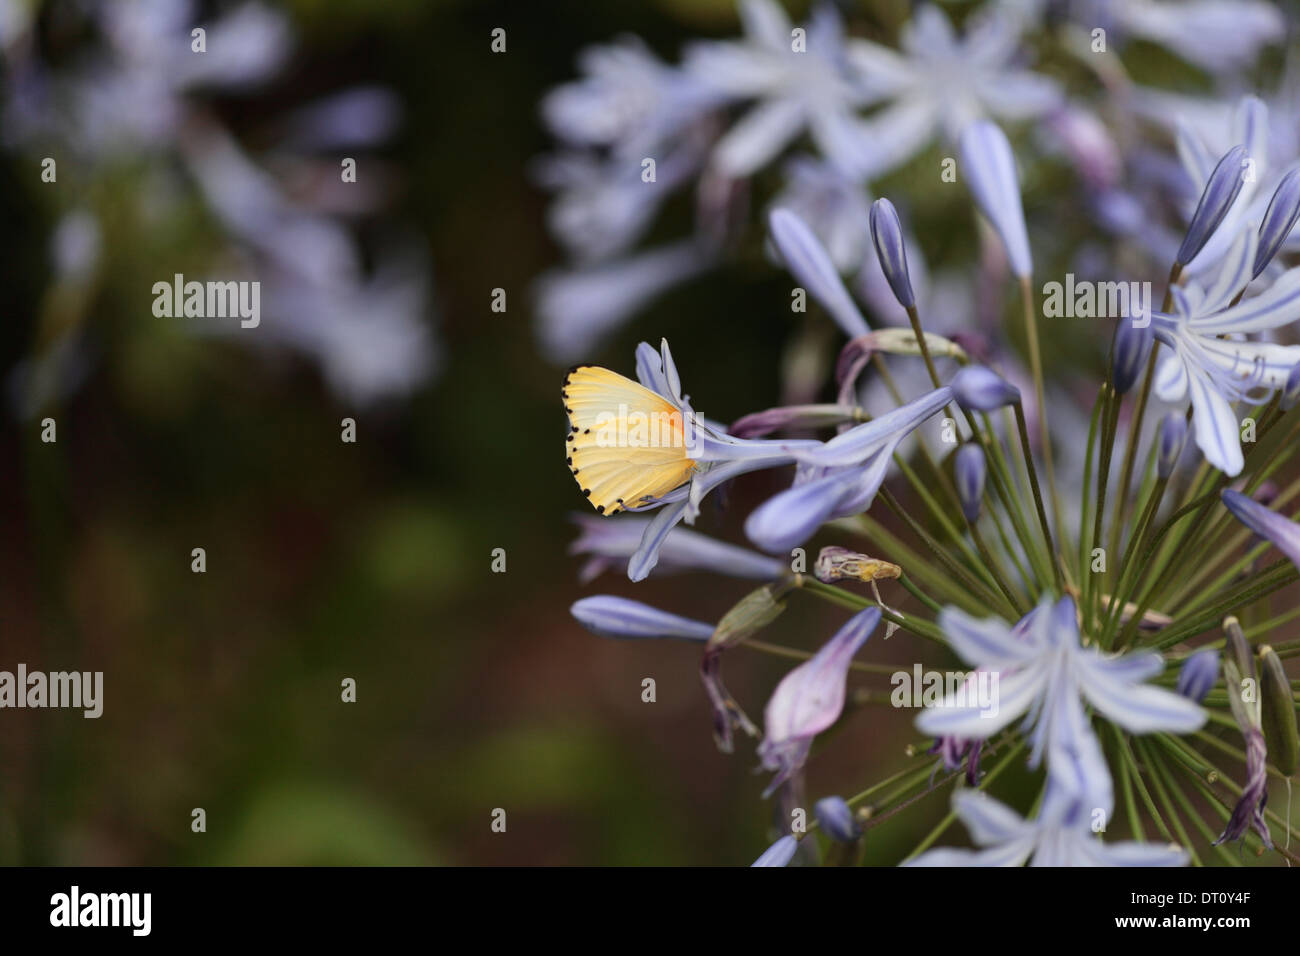 Butterfly feeding on nectar in an agapanthus flower Stock Photo